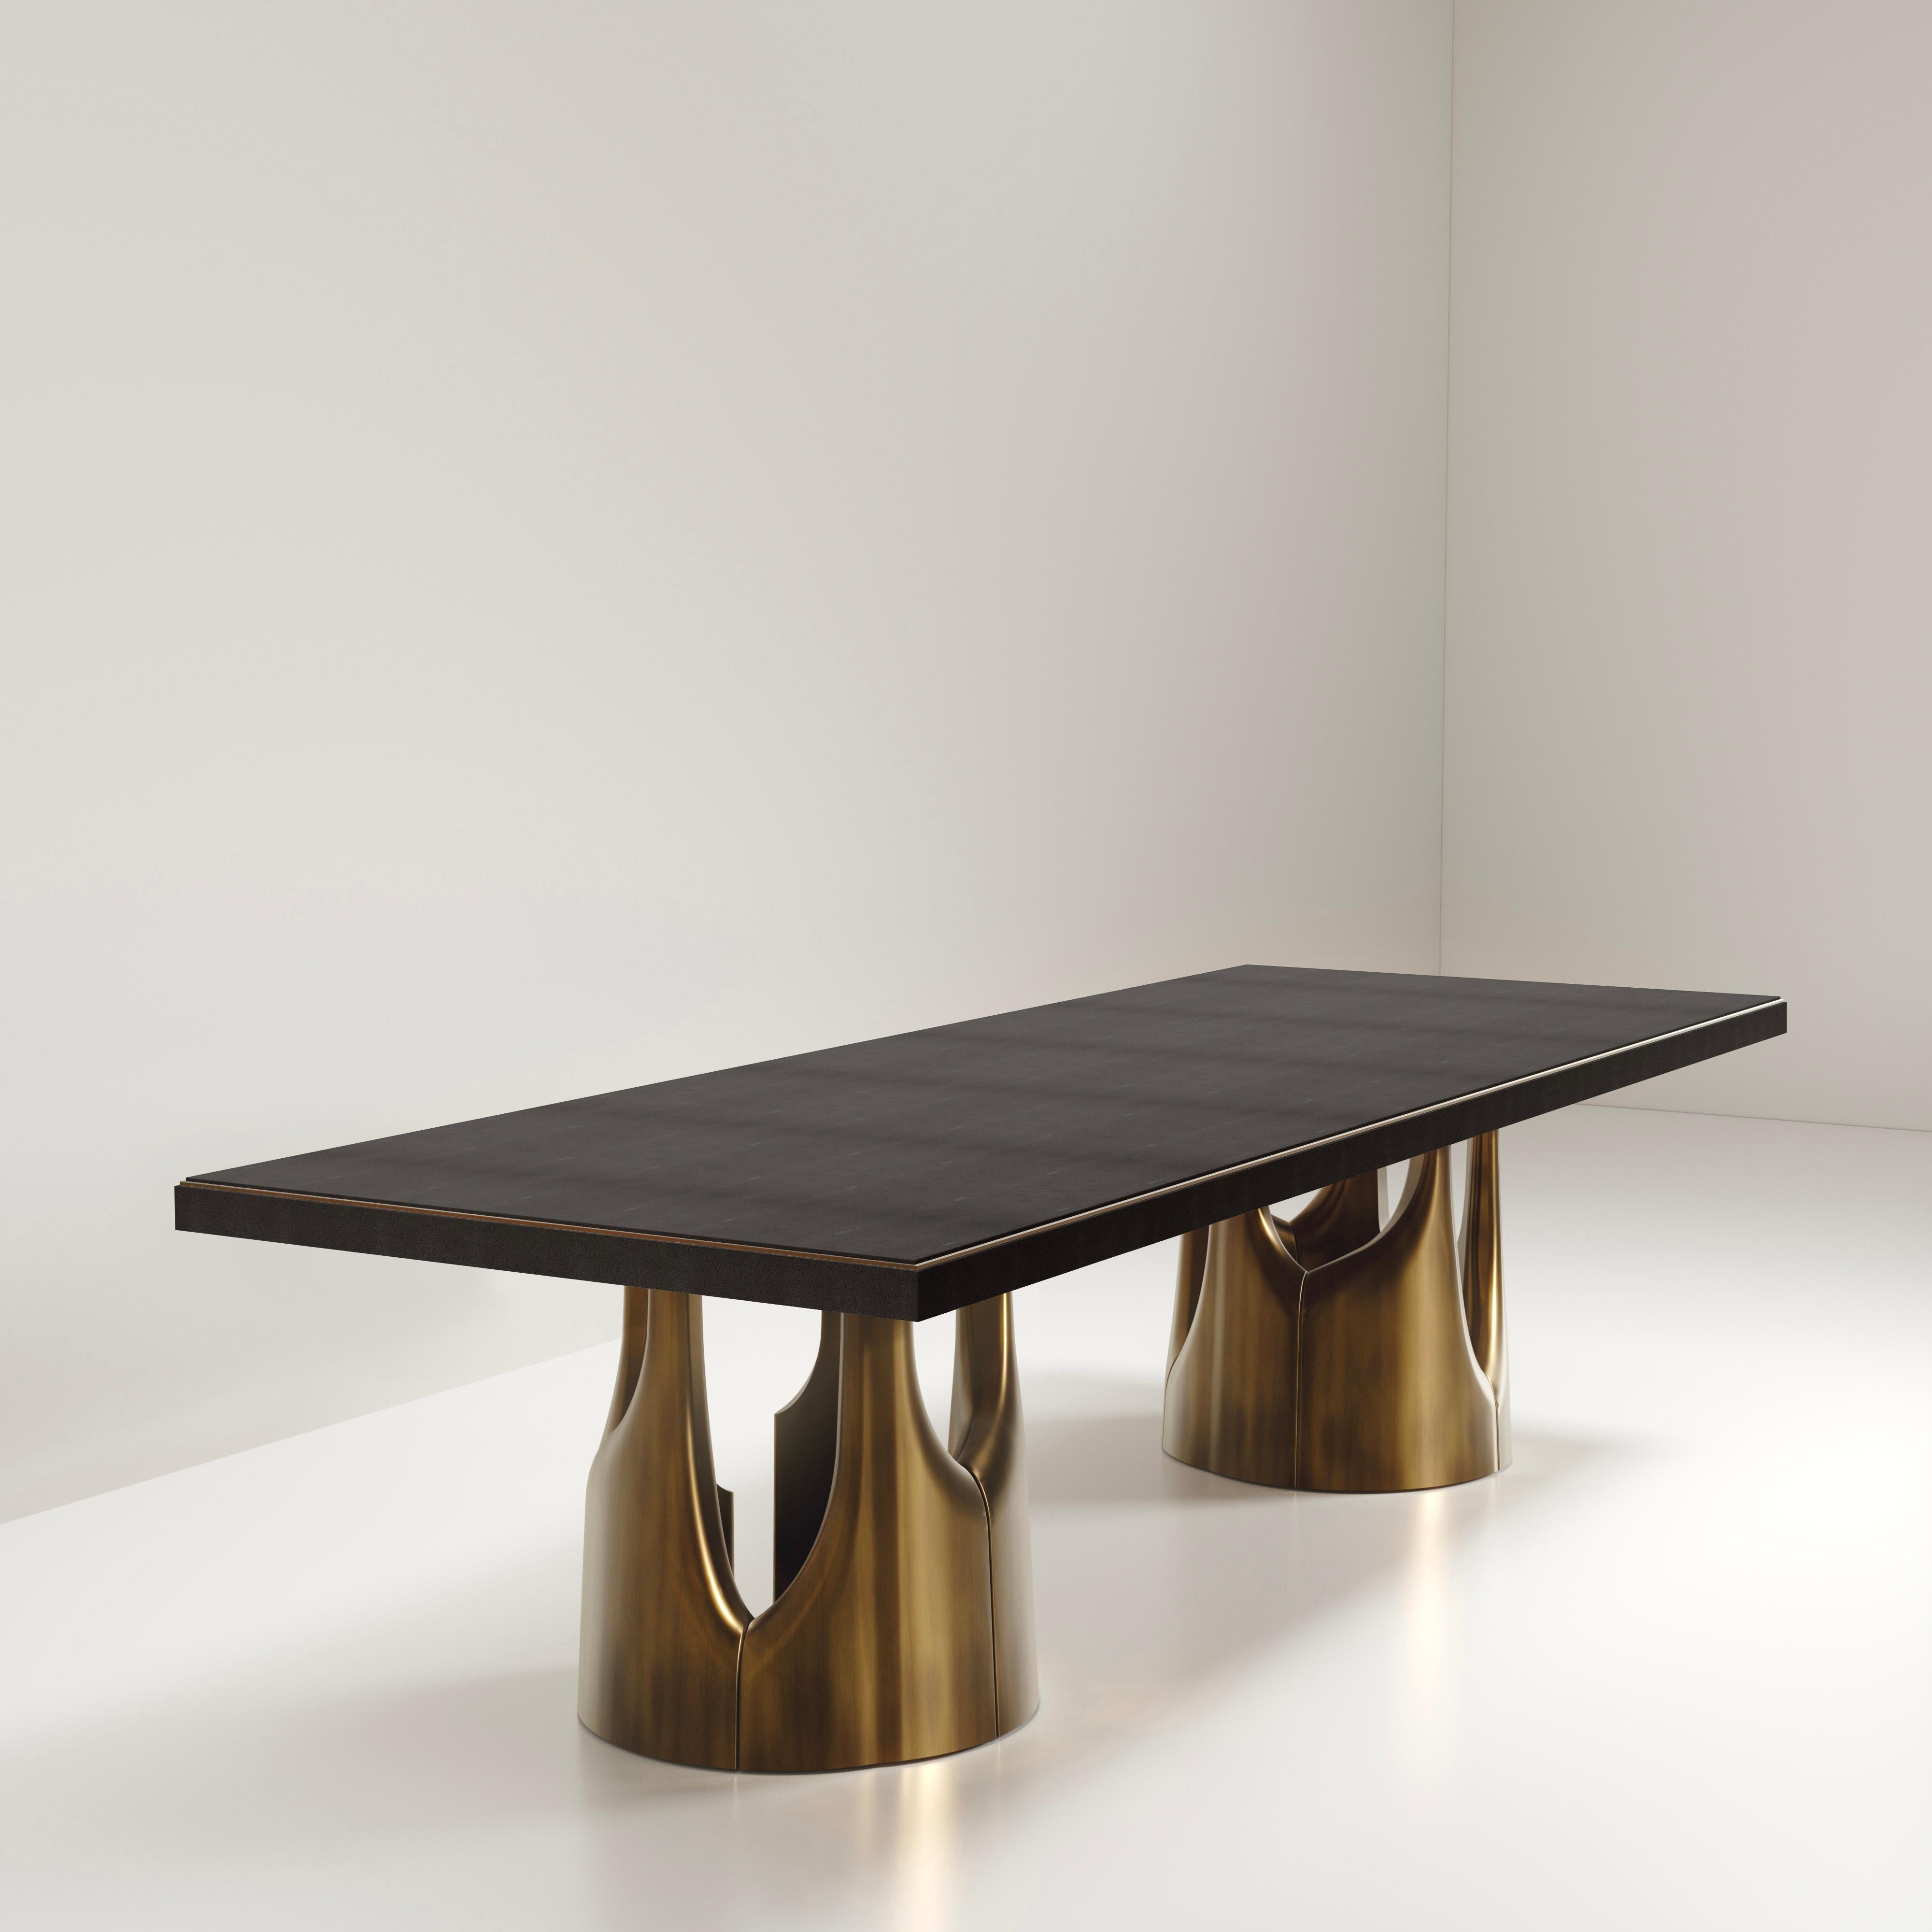 The Triptych I dining table by R&Y Augousti is a stunning multi-faceted sculptural piece. The beautiful hand craved details on the bronze-patina base demonstrate the incredible artisan work of Augousti. The top is inlaid in black shagreen. Available